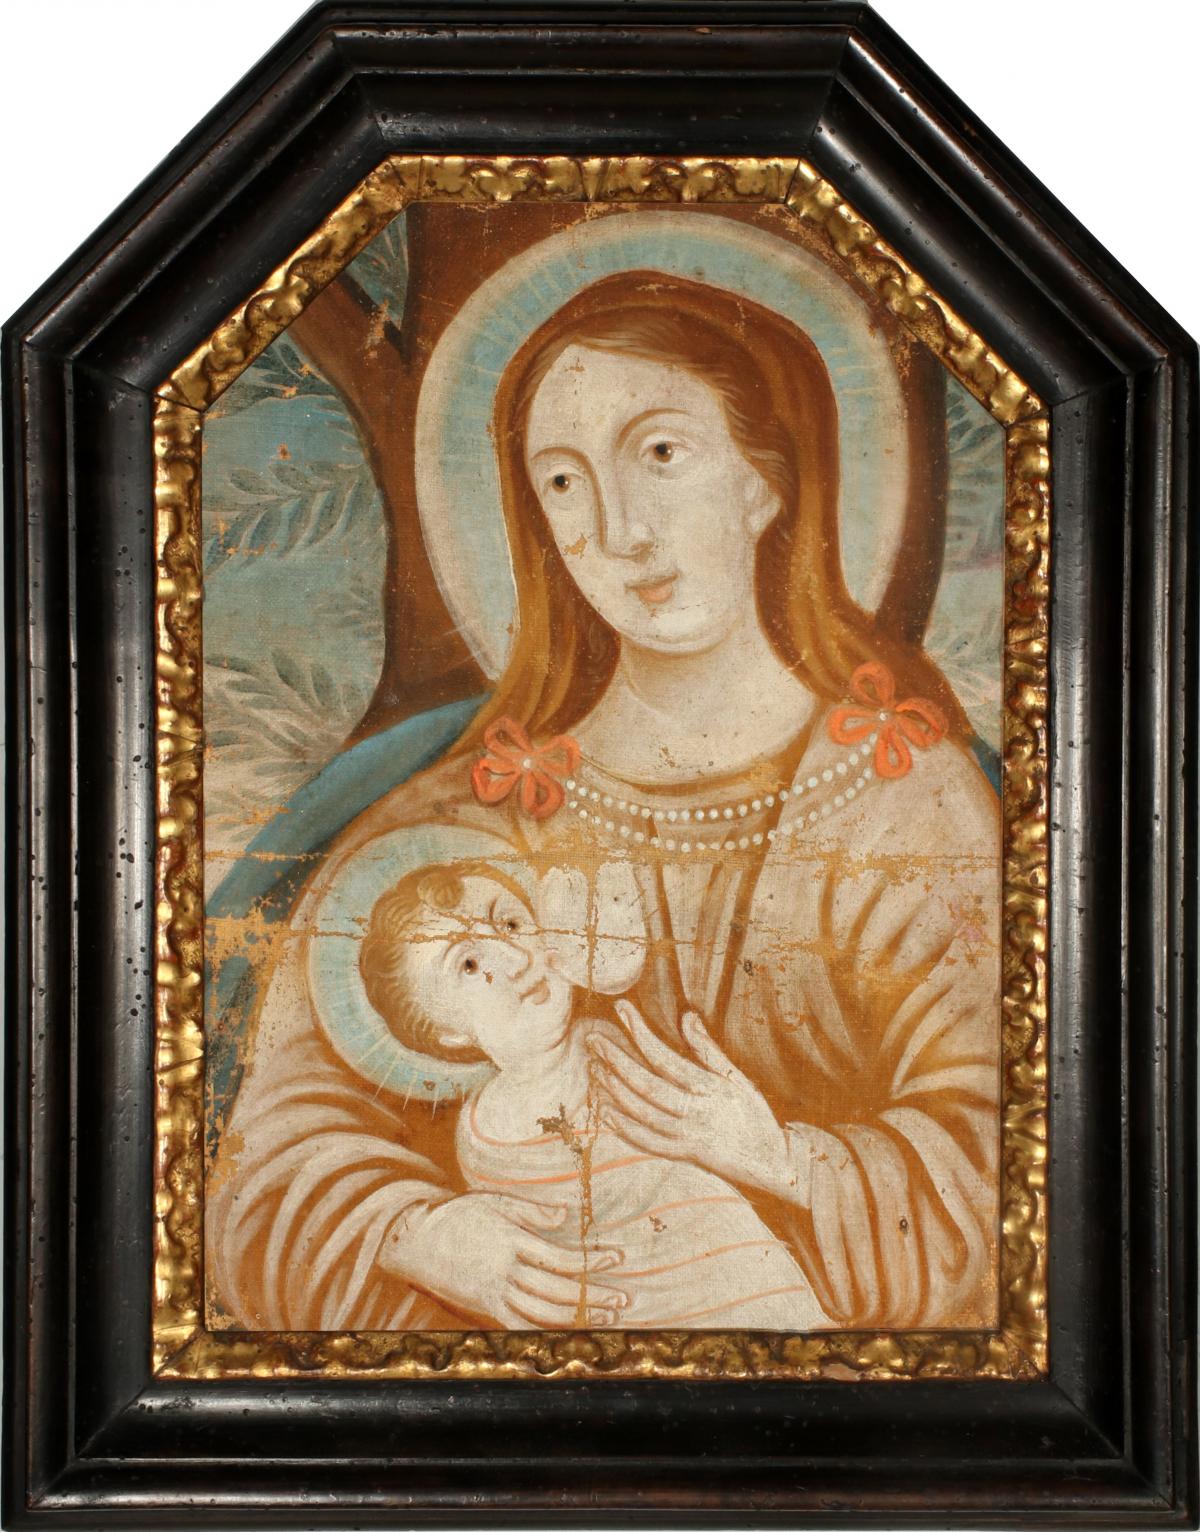 A GOOD 17TH/18TH C ITALIAN PAINTING OF THE MADONNA